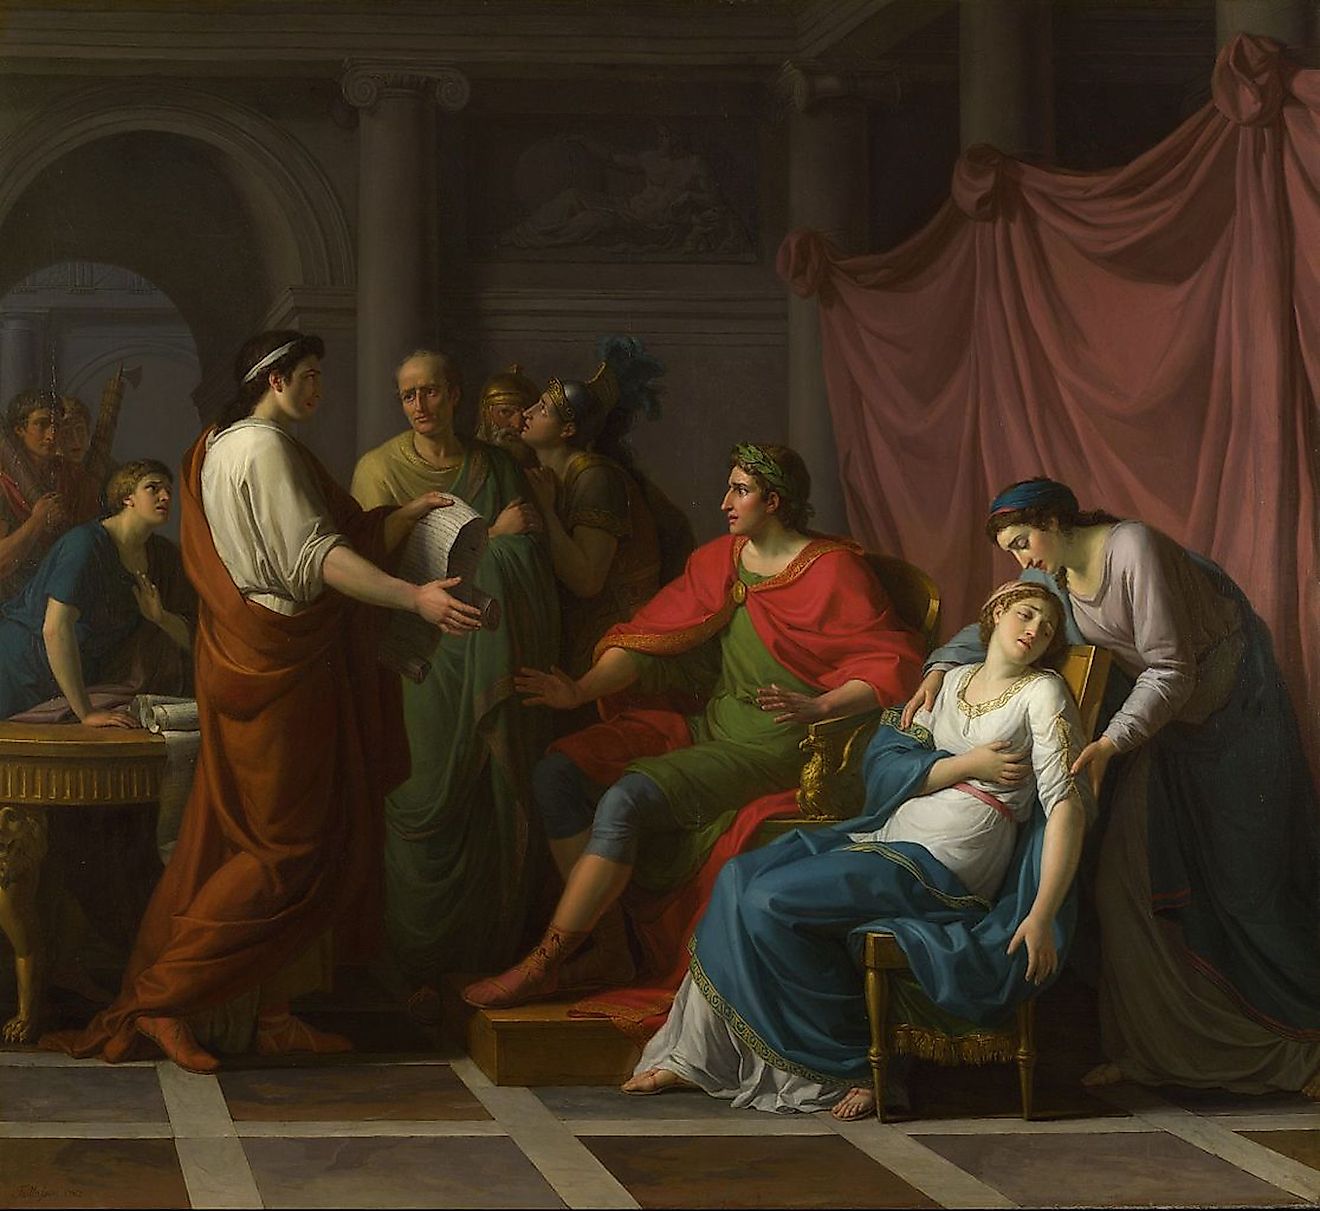 Virgil reading Aeneid, Book VI, to Augustus and Octavia, by Taillasson. Image credit: National Gallery/Public domain